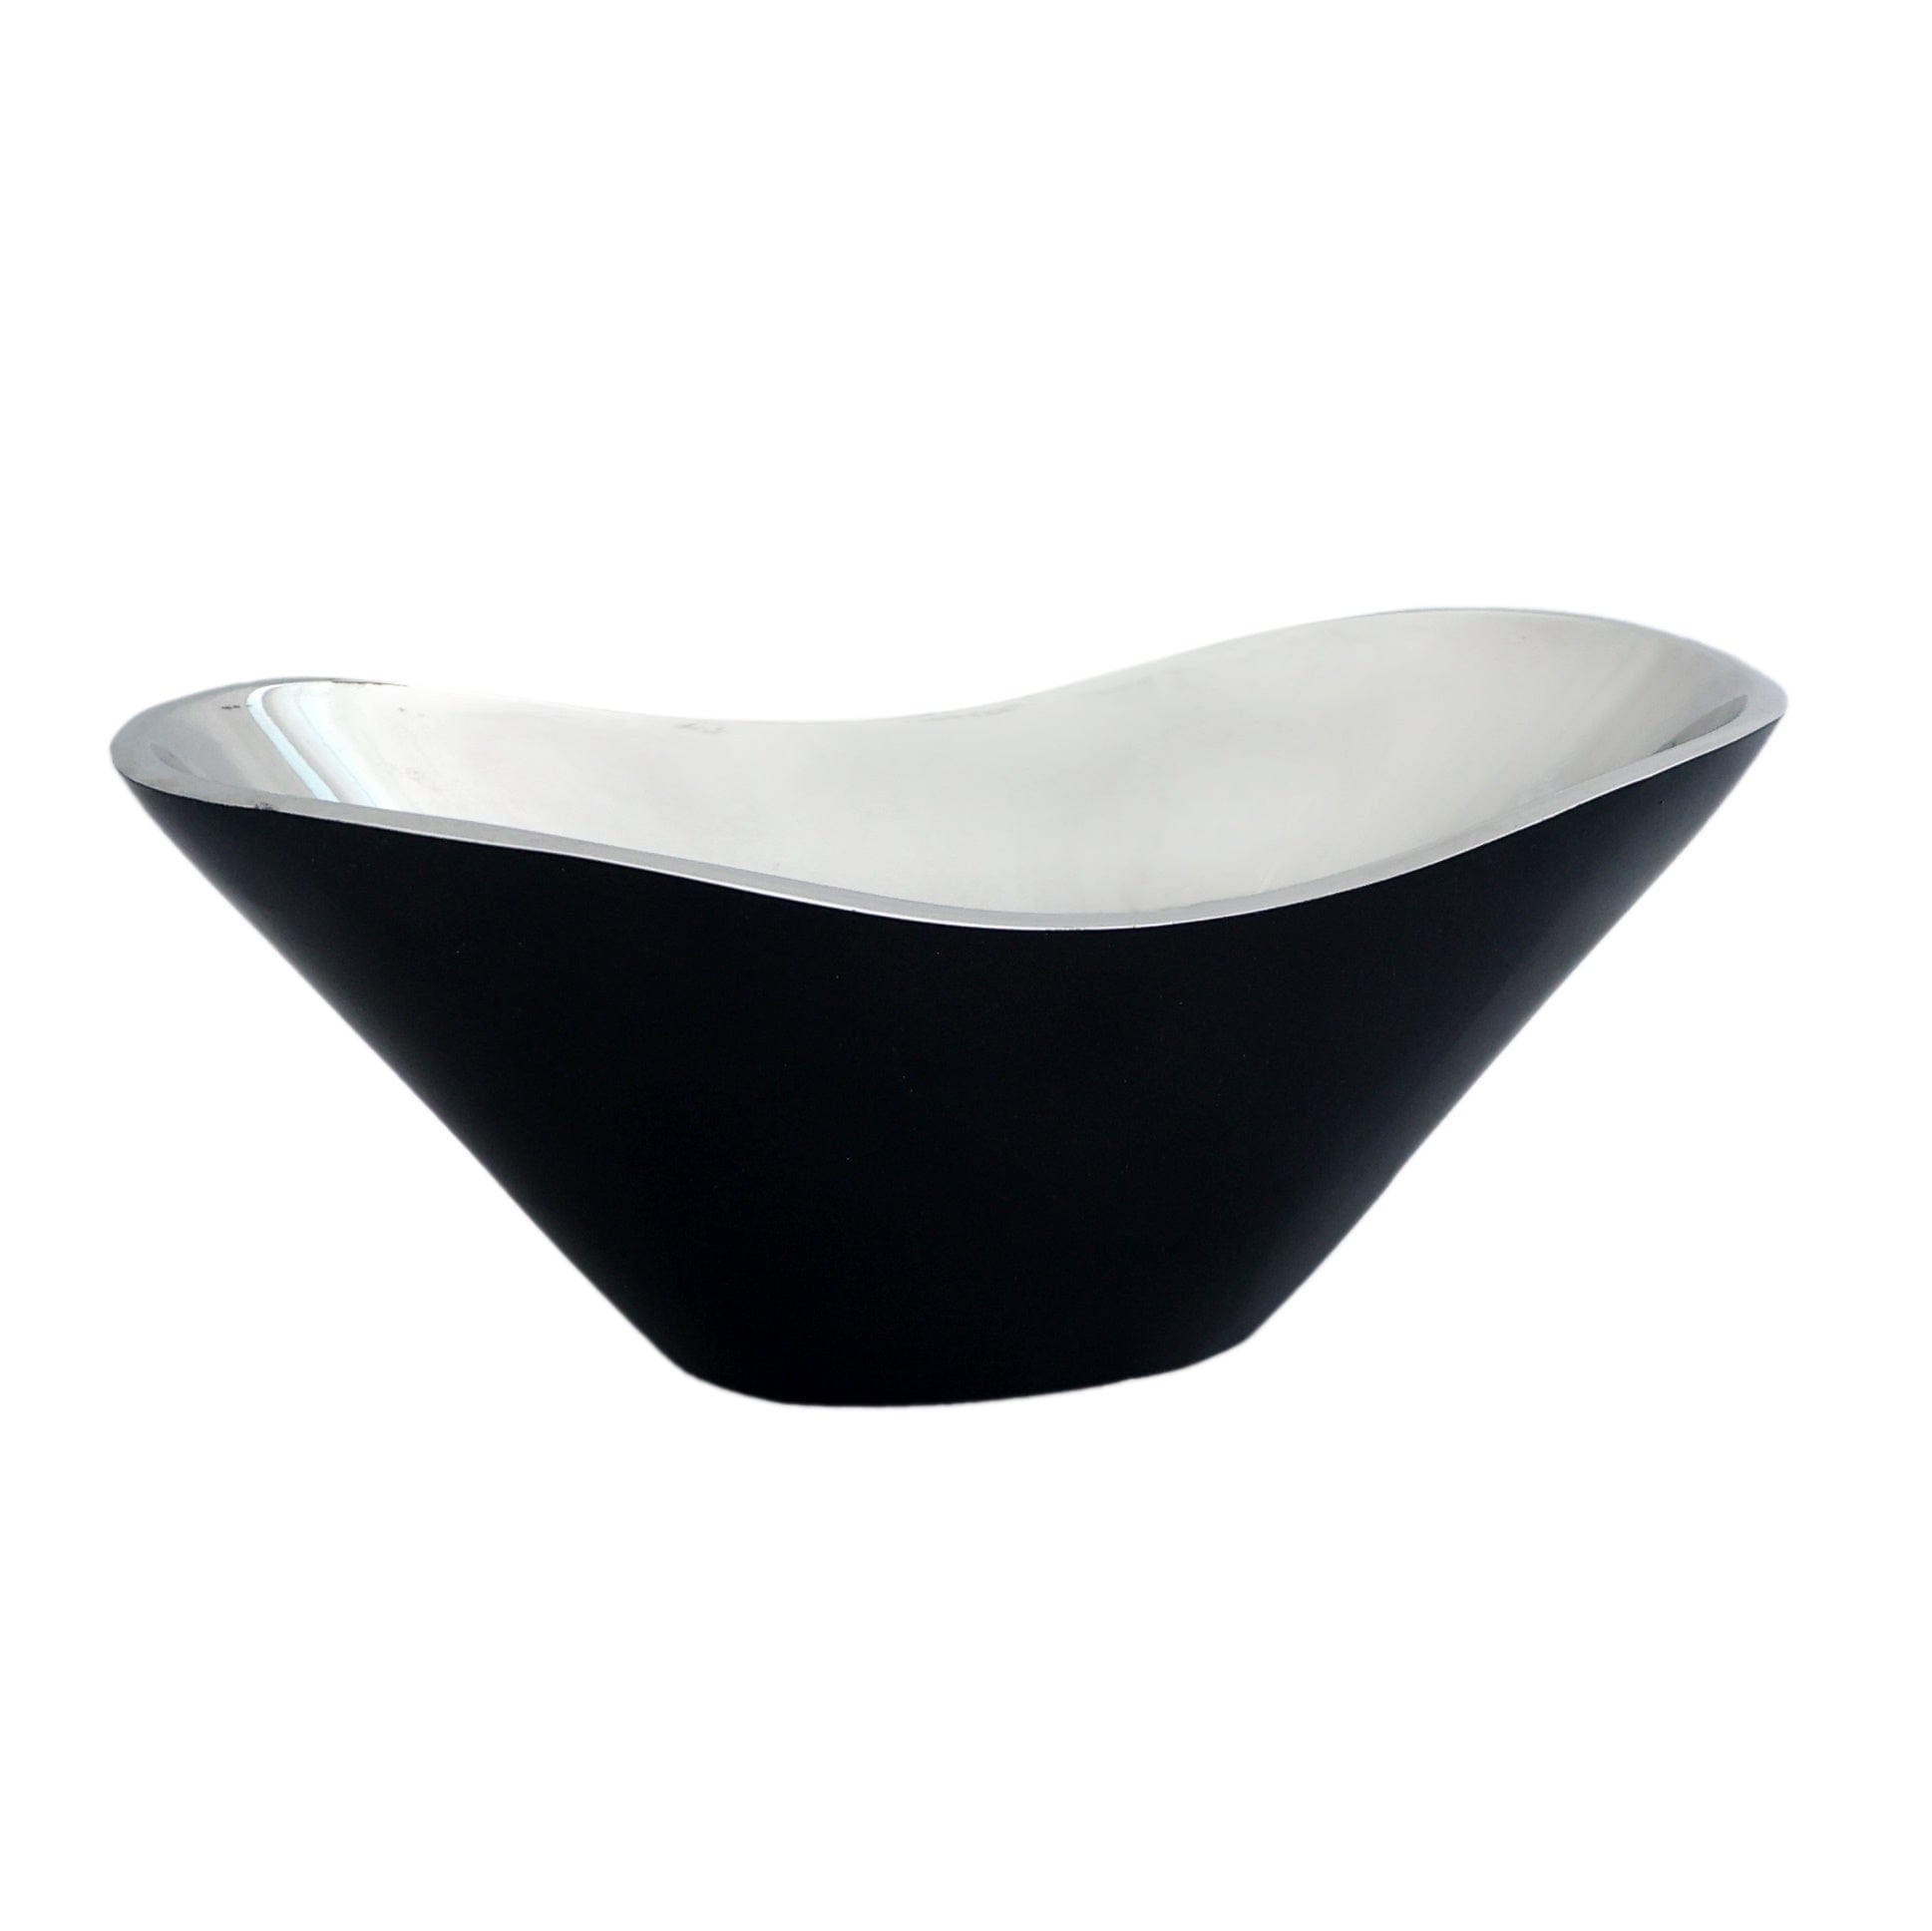 Opulent Oval Bowl Silver